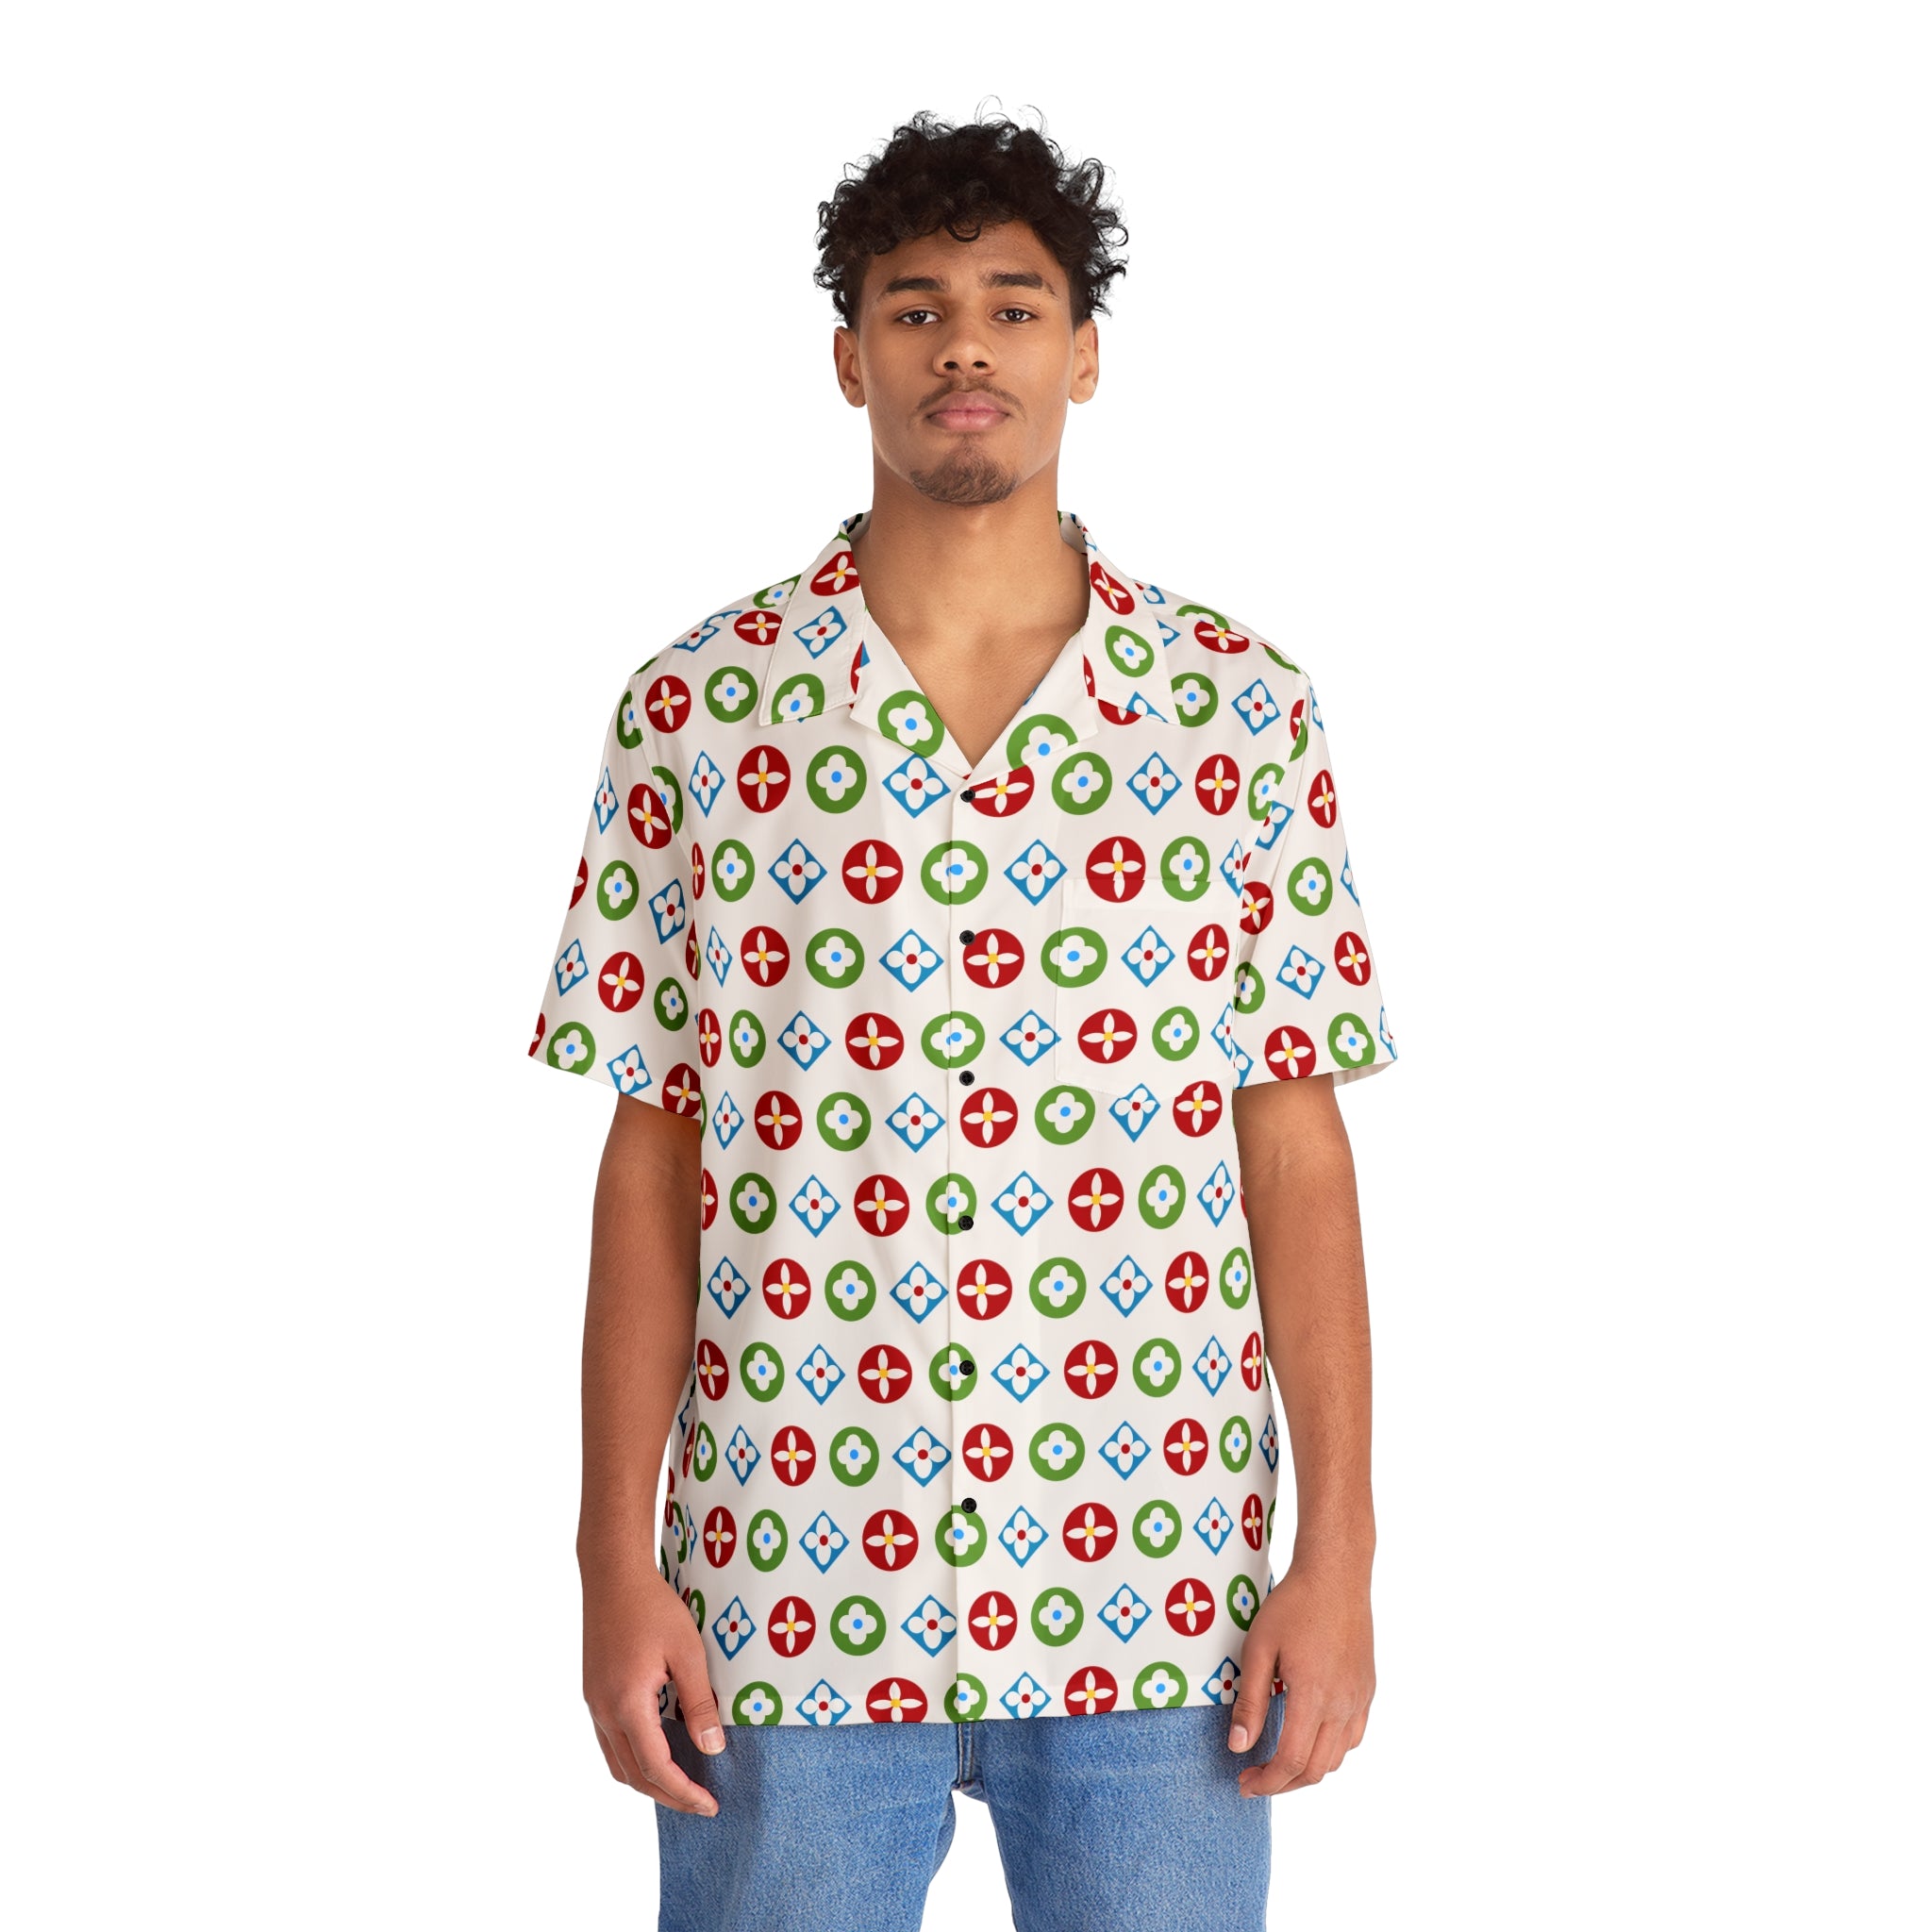  Groove Collection Trilogy of Icons Pattern (Red, Green, Blue) White Unisex Gender Neutral Button Up Shirt, Hawaiian Shit Men's Shirts